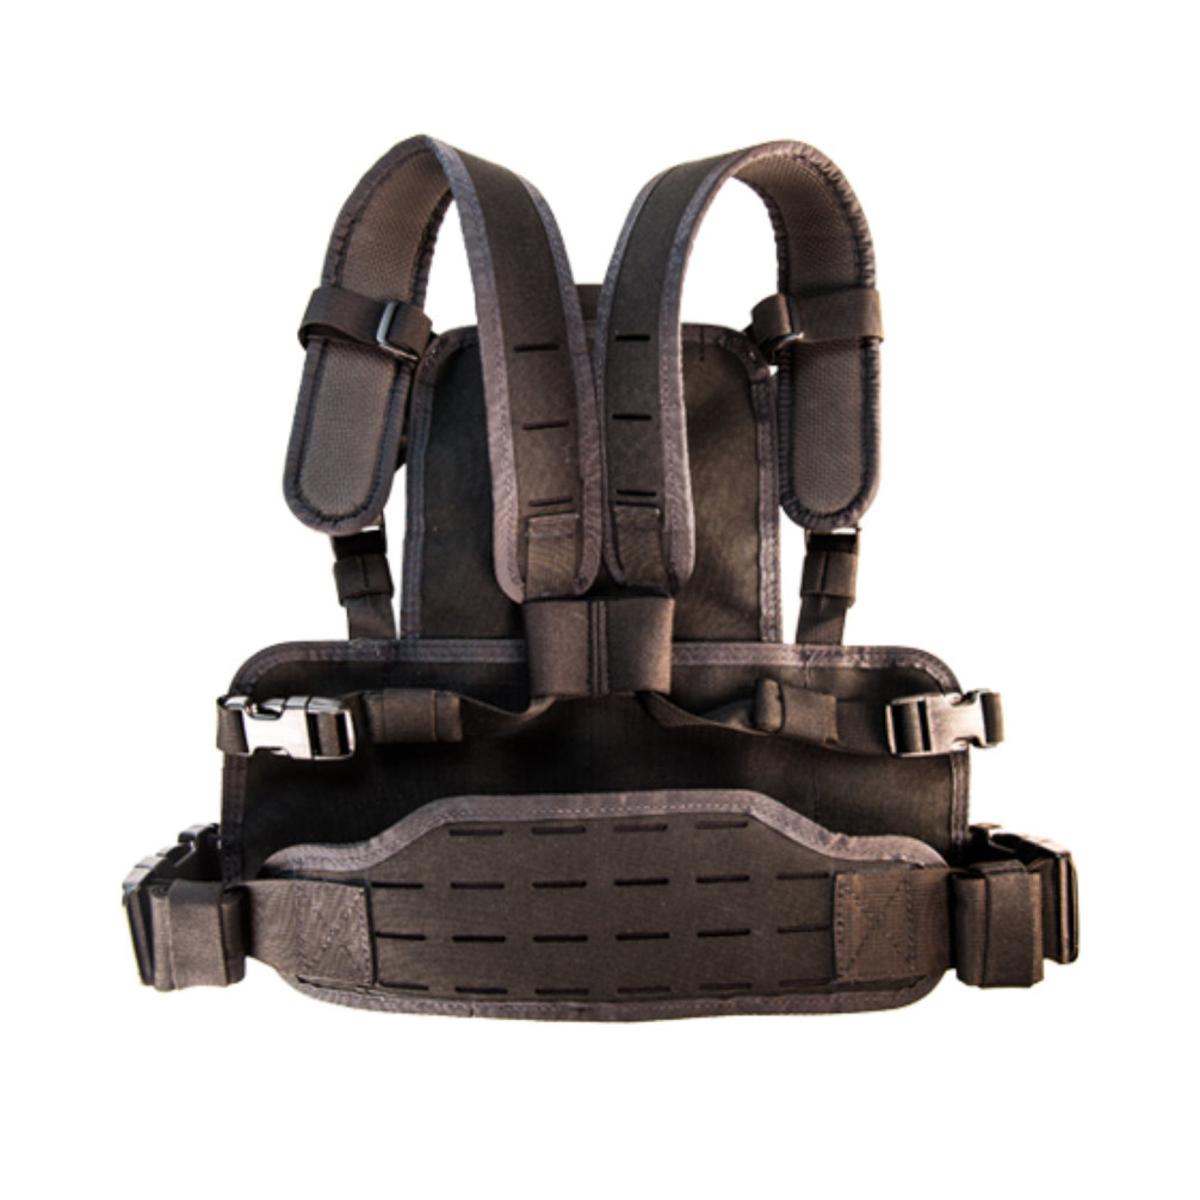 High Speed Gear Neo Chest Rig, MOLLE Vest w/Removable Bib and Shoulder ...